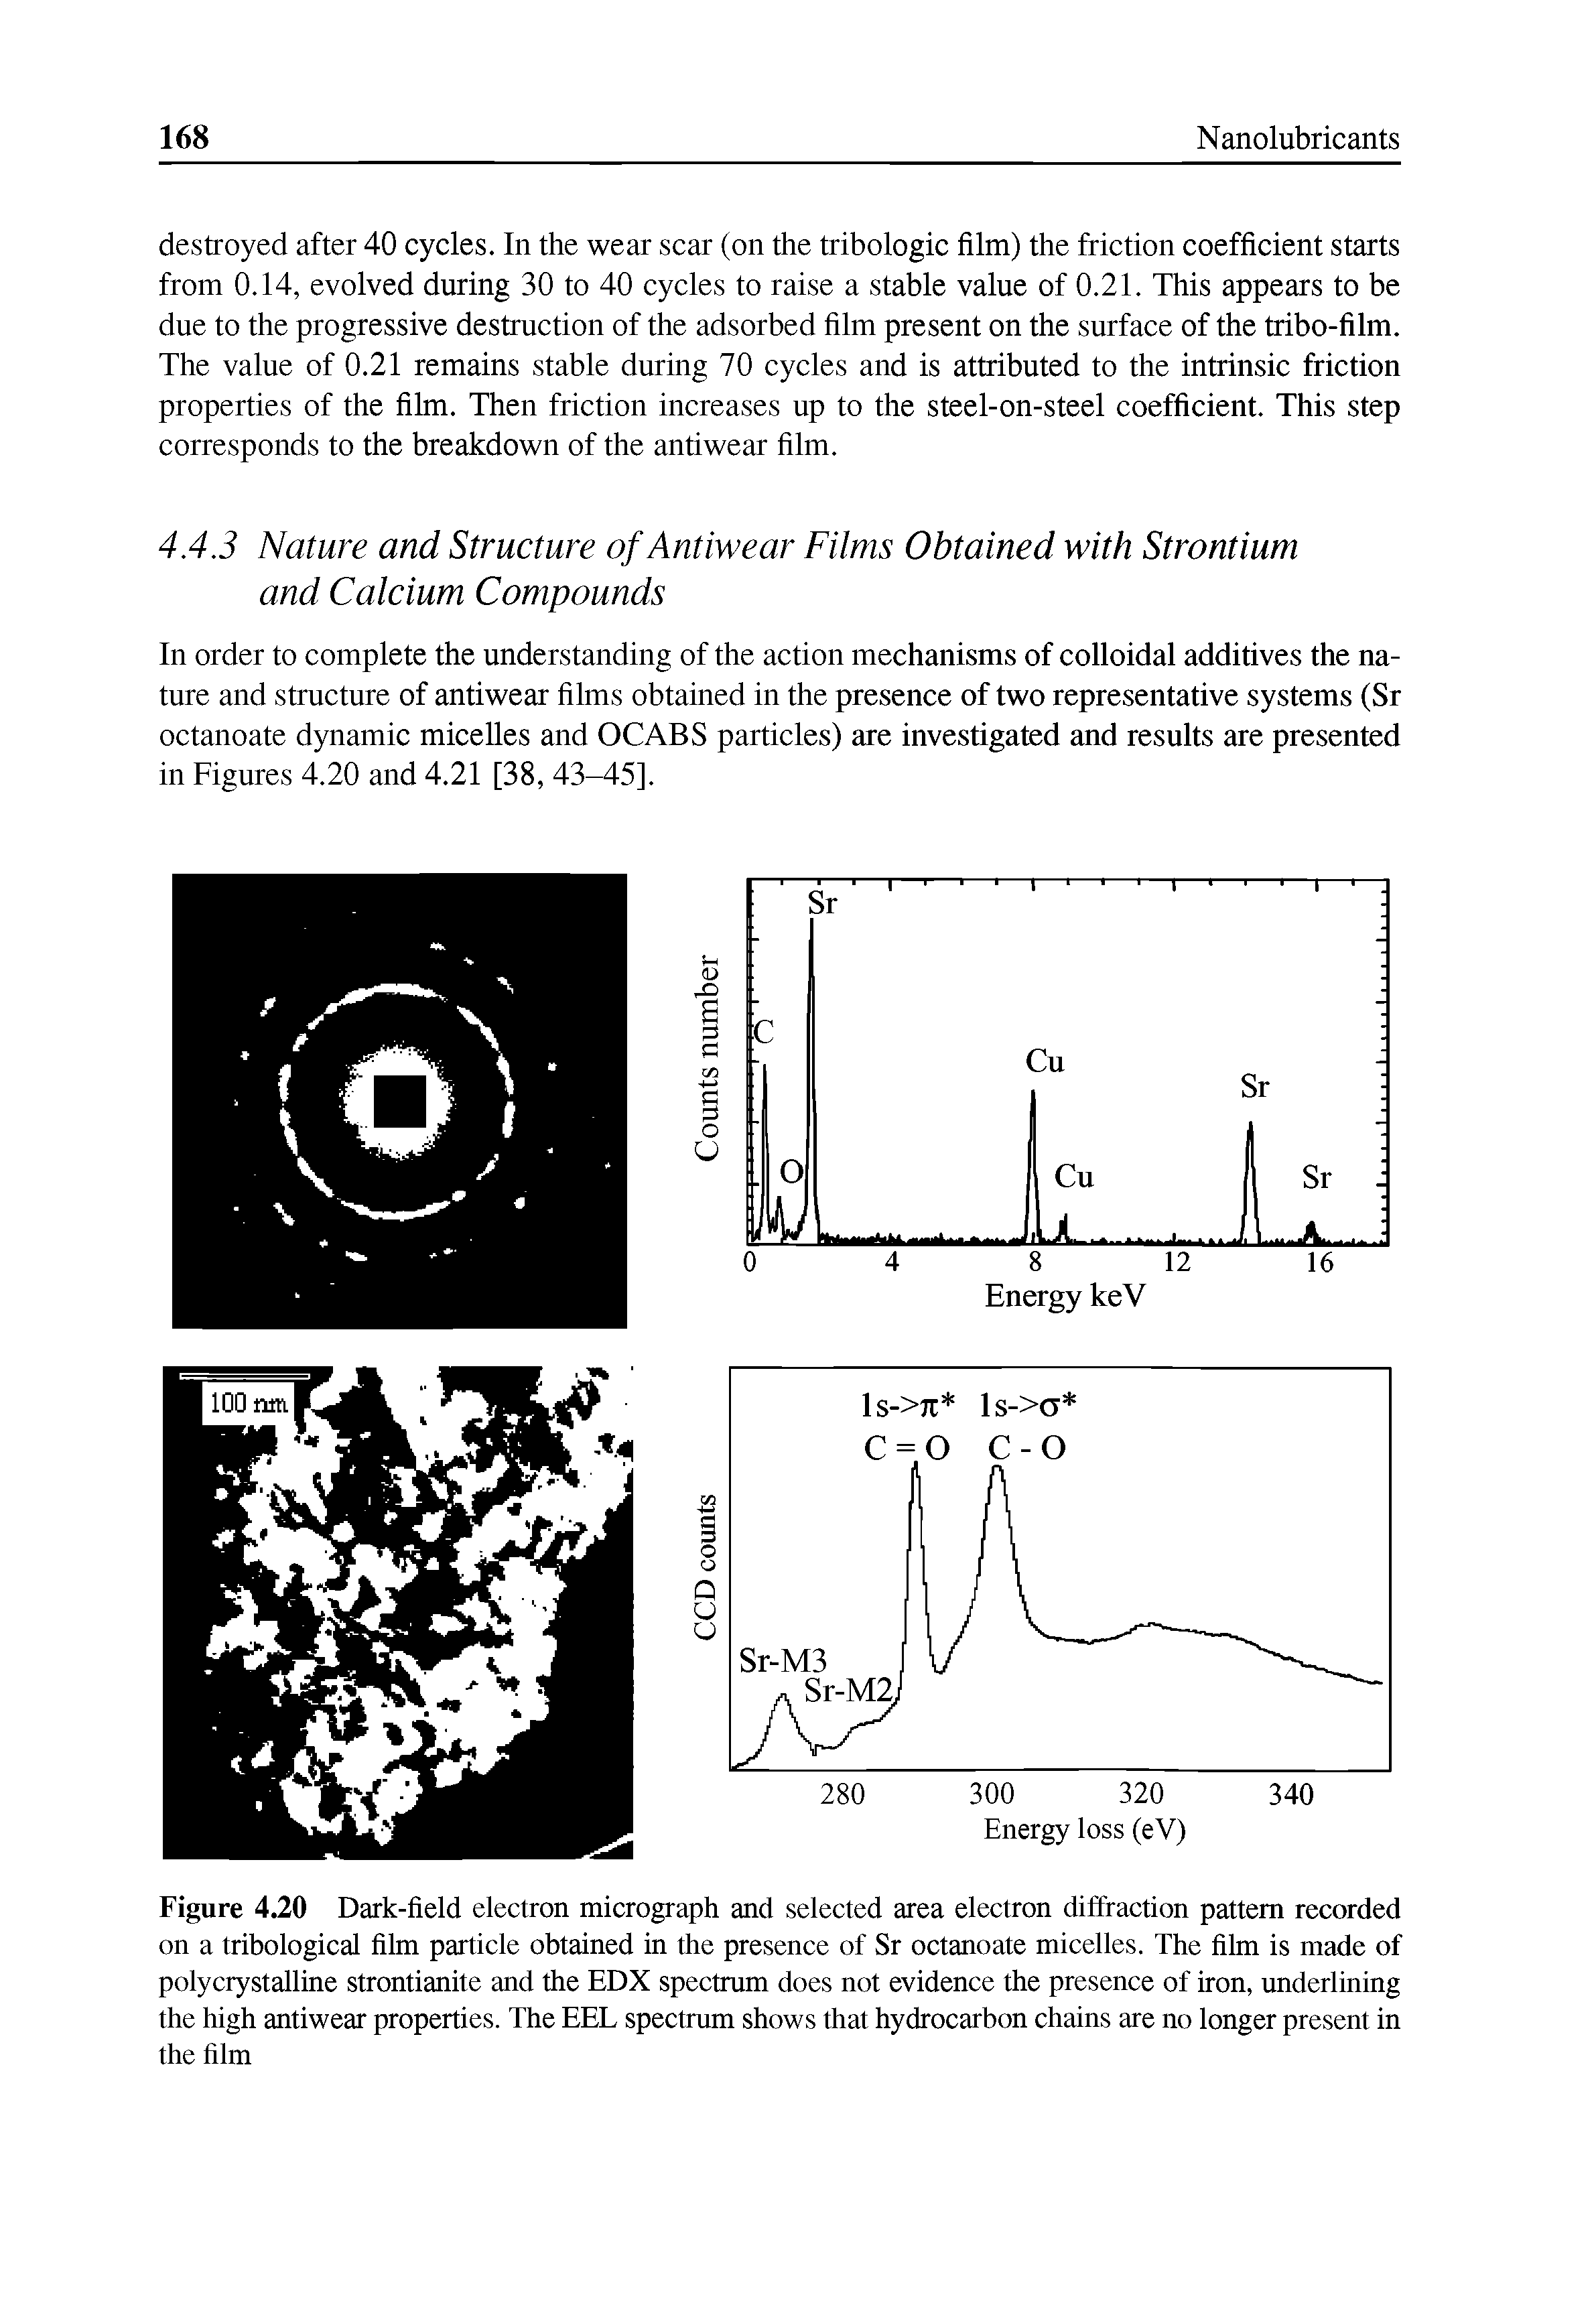 Figure 4.20 Dark-field electron micrograph and selected area electron diffraction pattern recorded on a tribological film particle obtained in the presence of Sr octanoate micelles. The film is made of polycrystalline strontianite and the EDX spectrum does not evidence the presence of iron, underlining the high antiwear properties. The EEL spectrum shows that hydrocarbon chains are no longer present in the film...